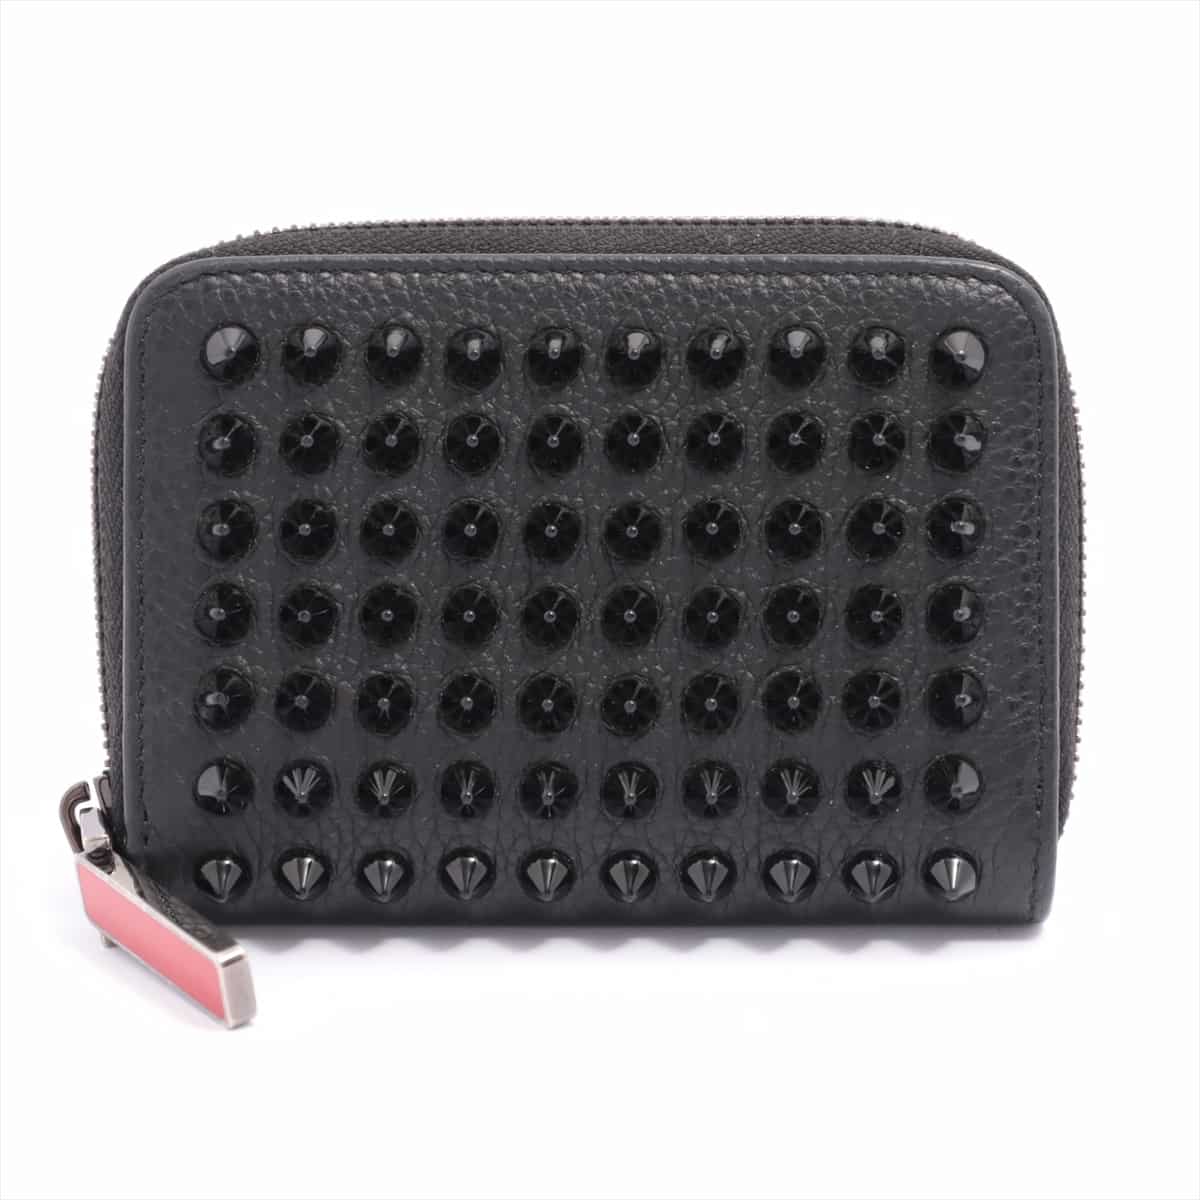 Christian Louboutin Panettone Rock Stud Spike Leather Coin case Black